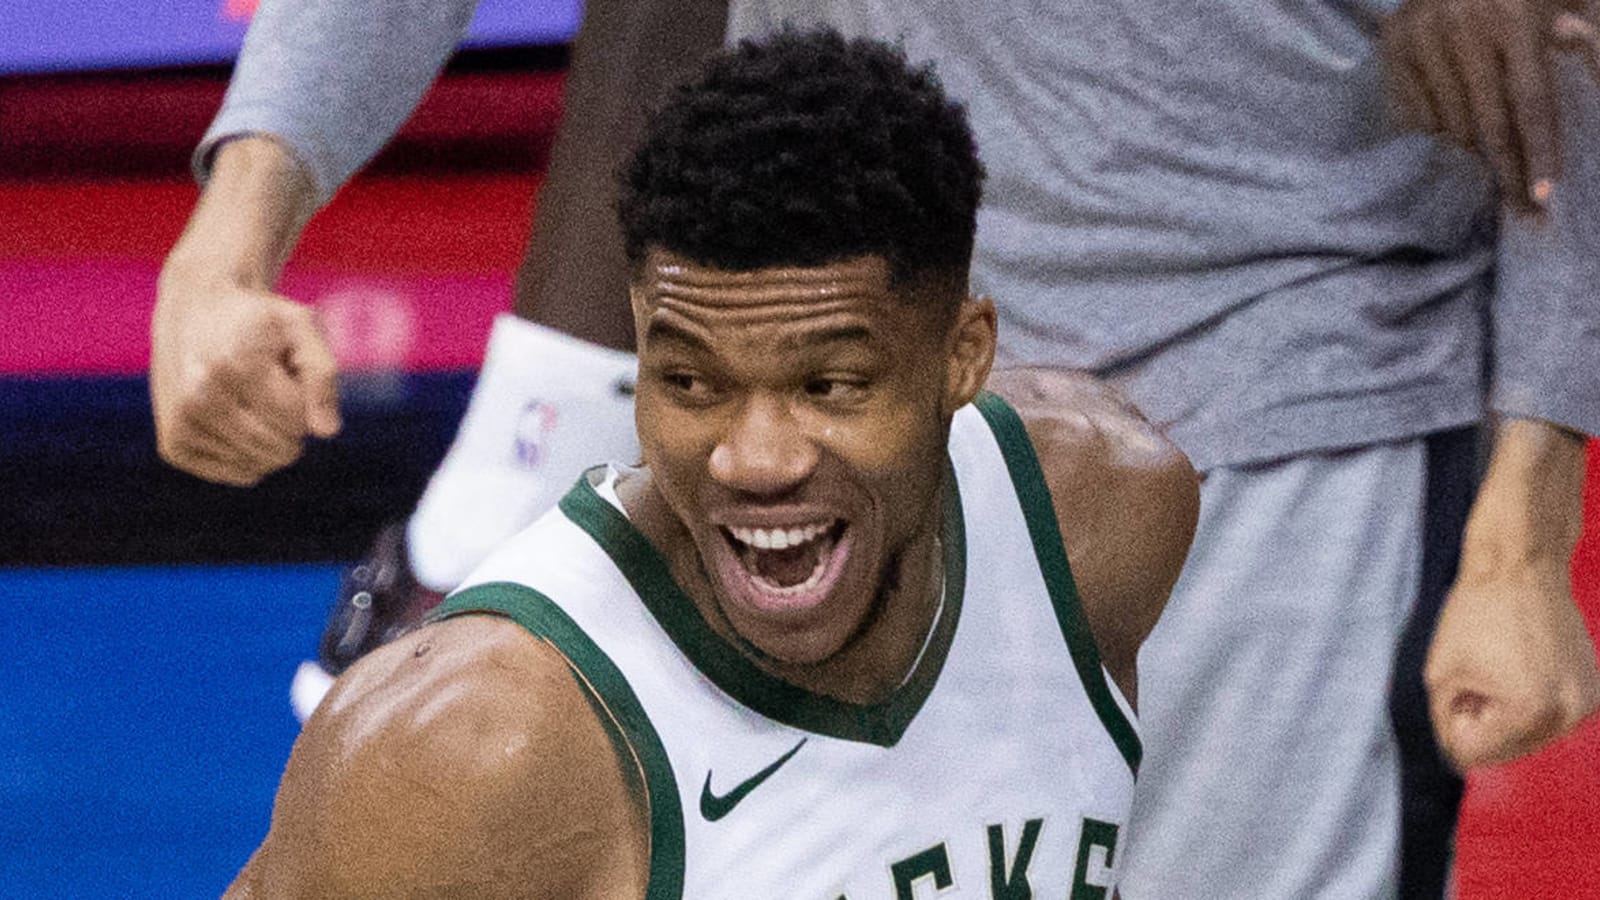 Dwight Howard was irked by Giannis Antetokounmpo's celebration